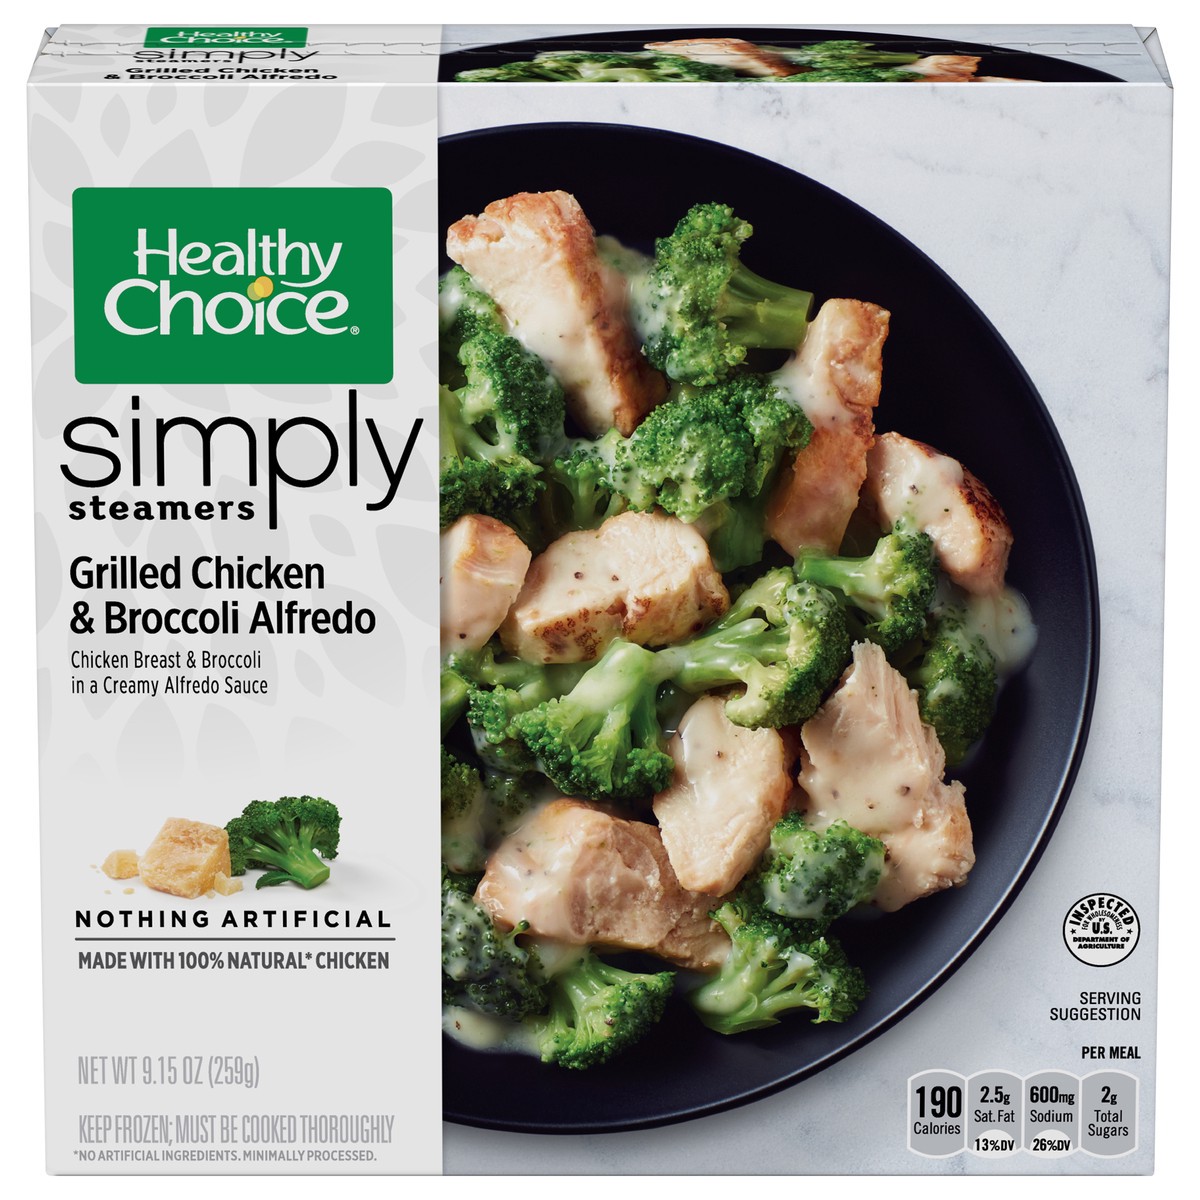 slide 2 of 12, Healthy Choice Simply Steamers Grilled Chicken & Broccoli Alfredo 9.15 oz, 9.15 oz